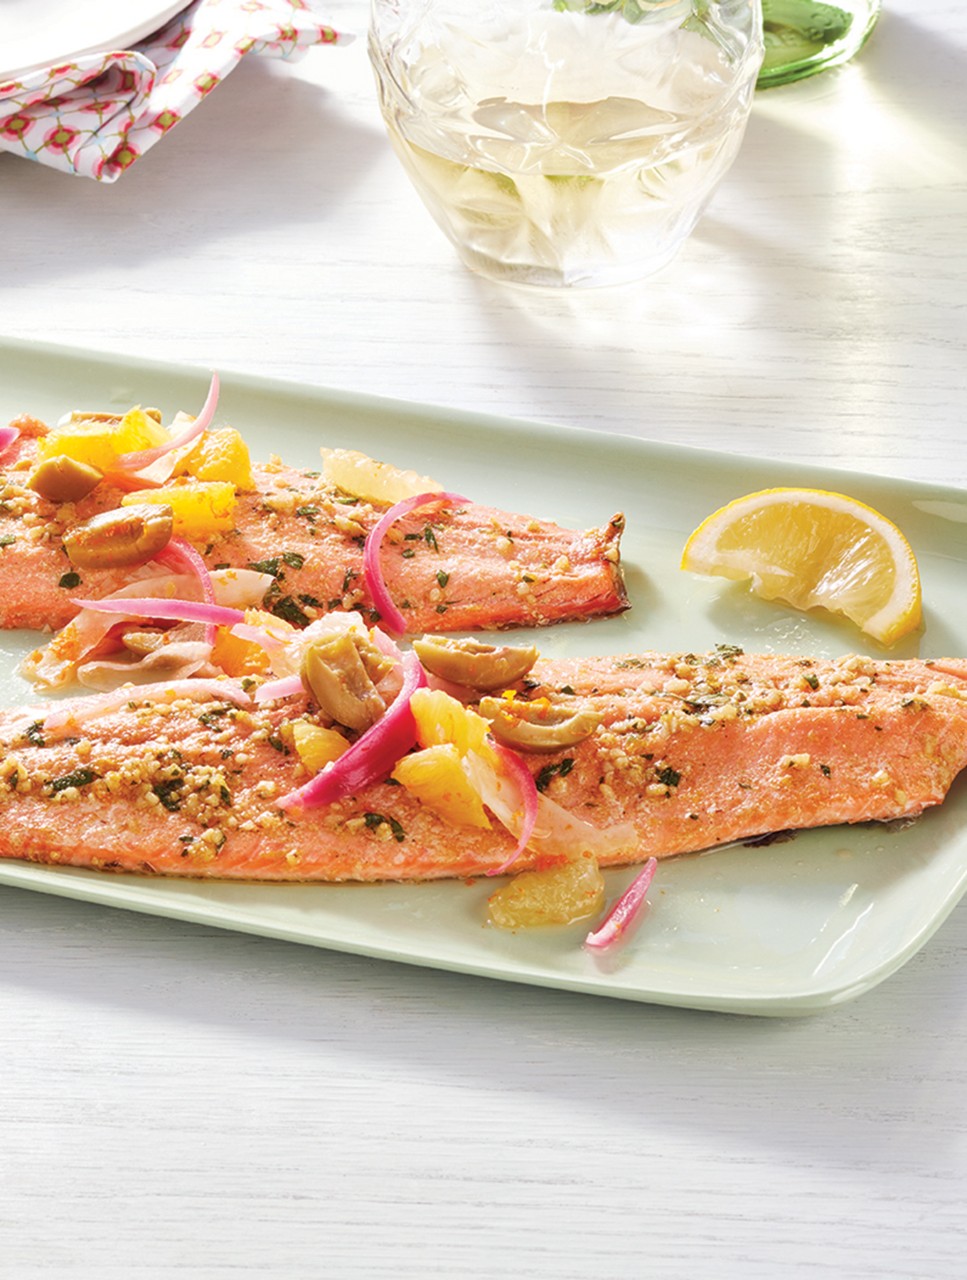 Slow-Roasted Trout with Olive & Citrus Salsa